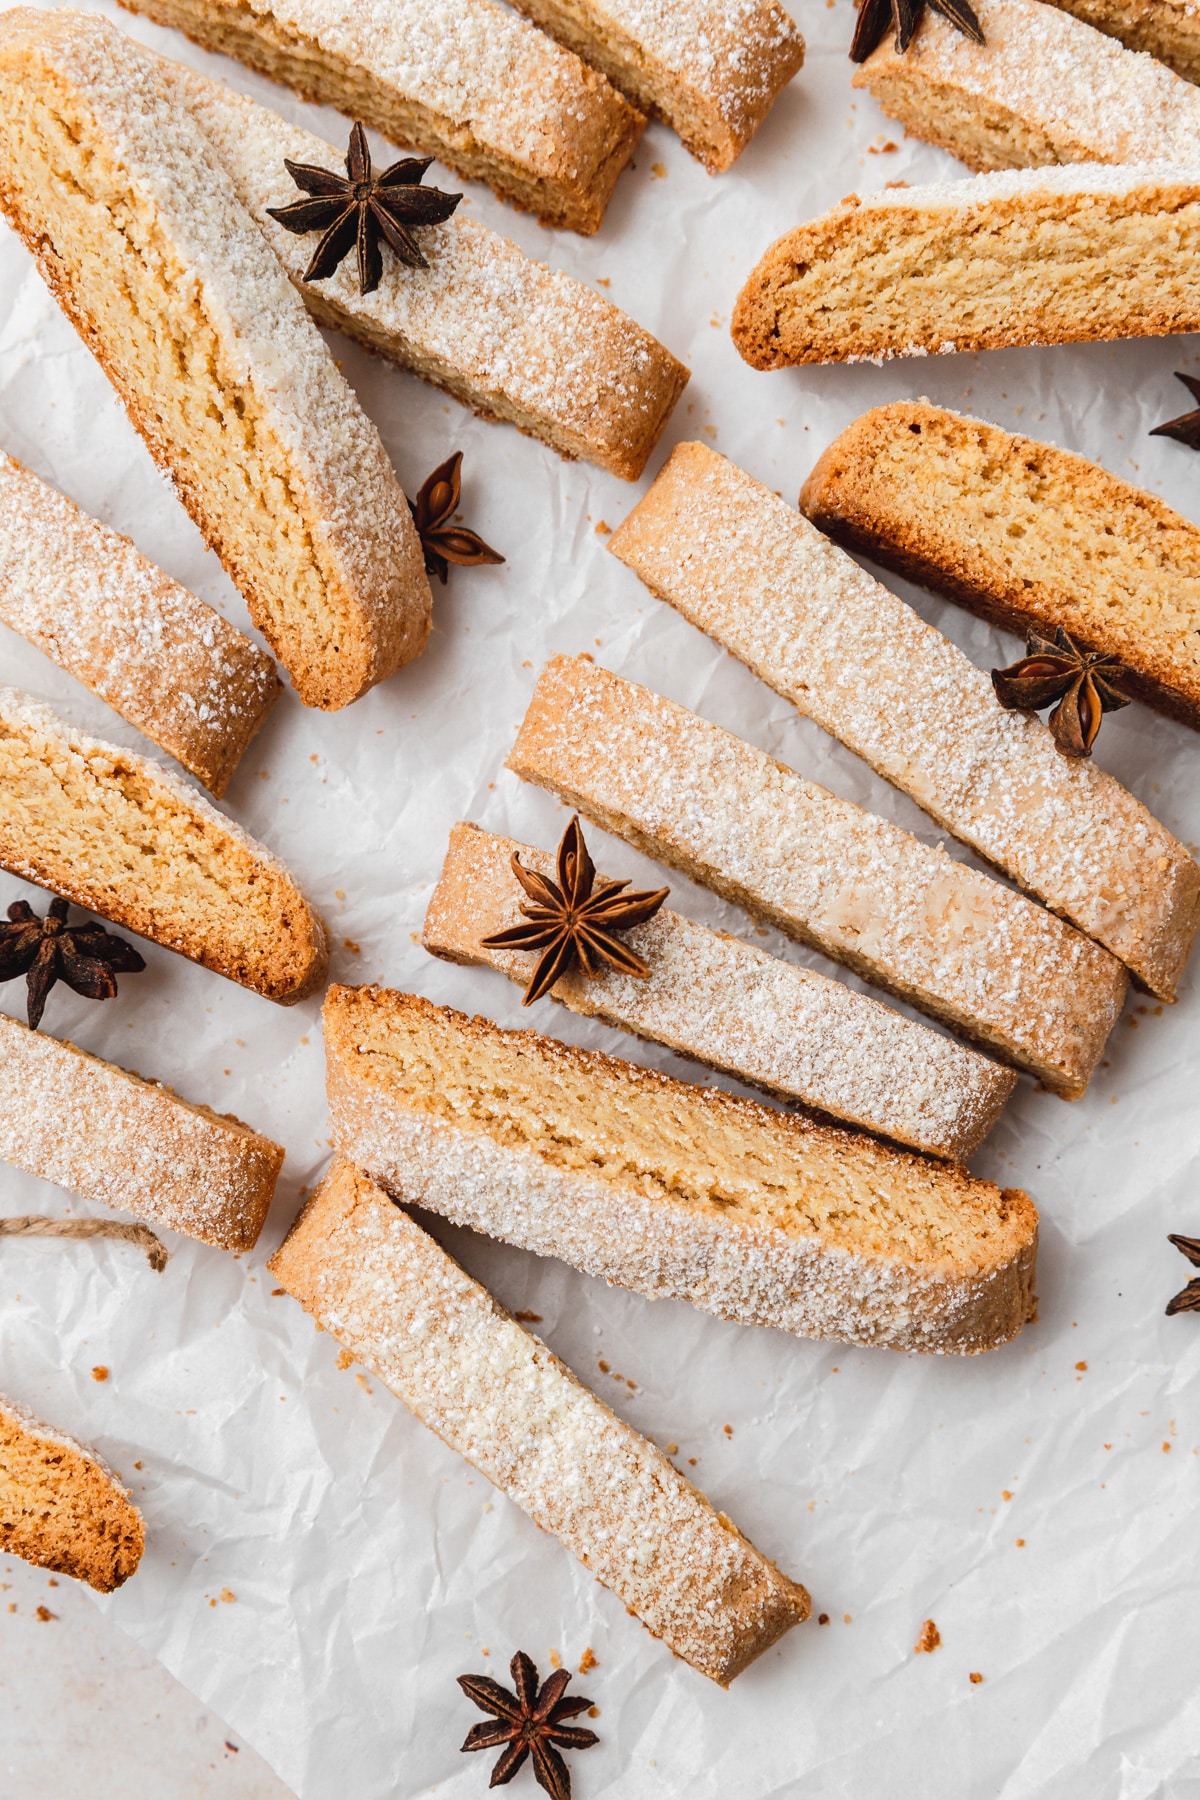 brown butter anise biscotti with powdered sugar on top.